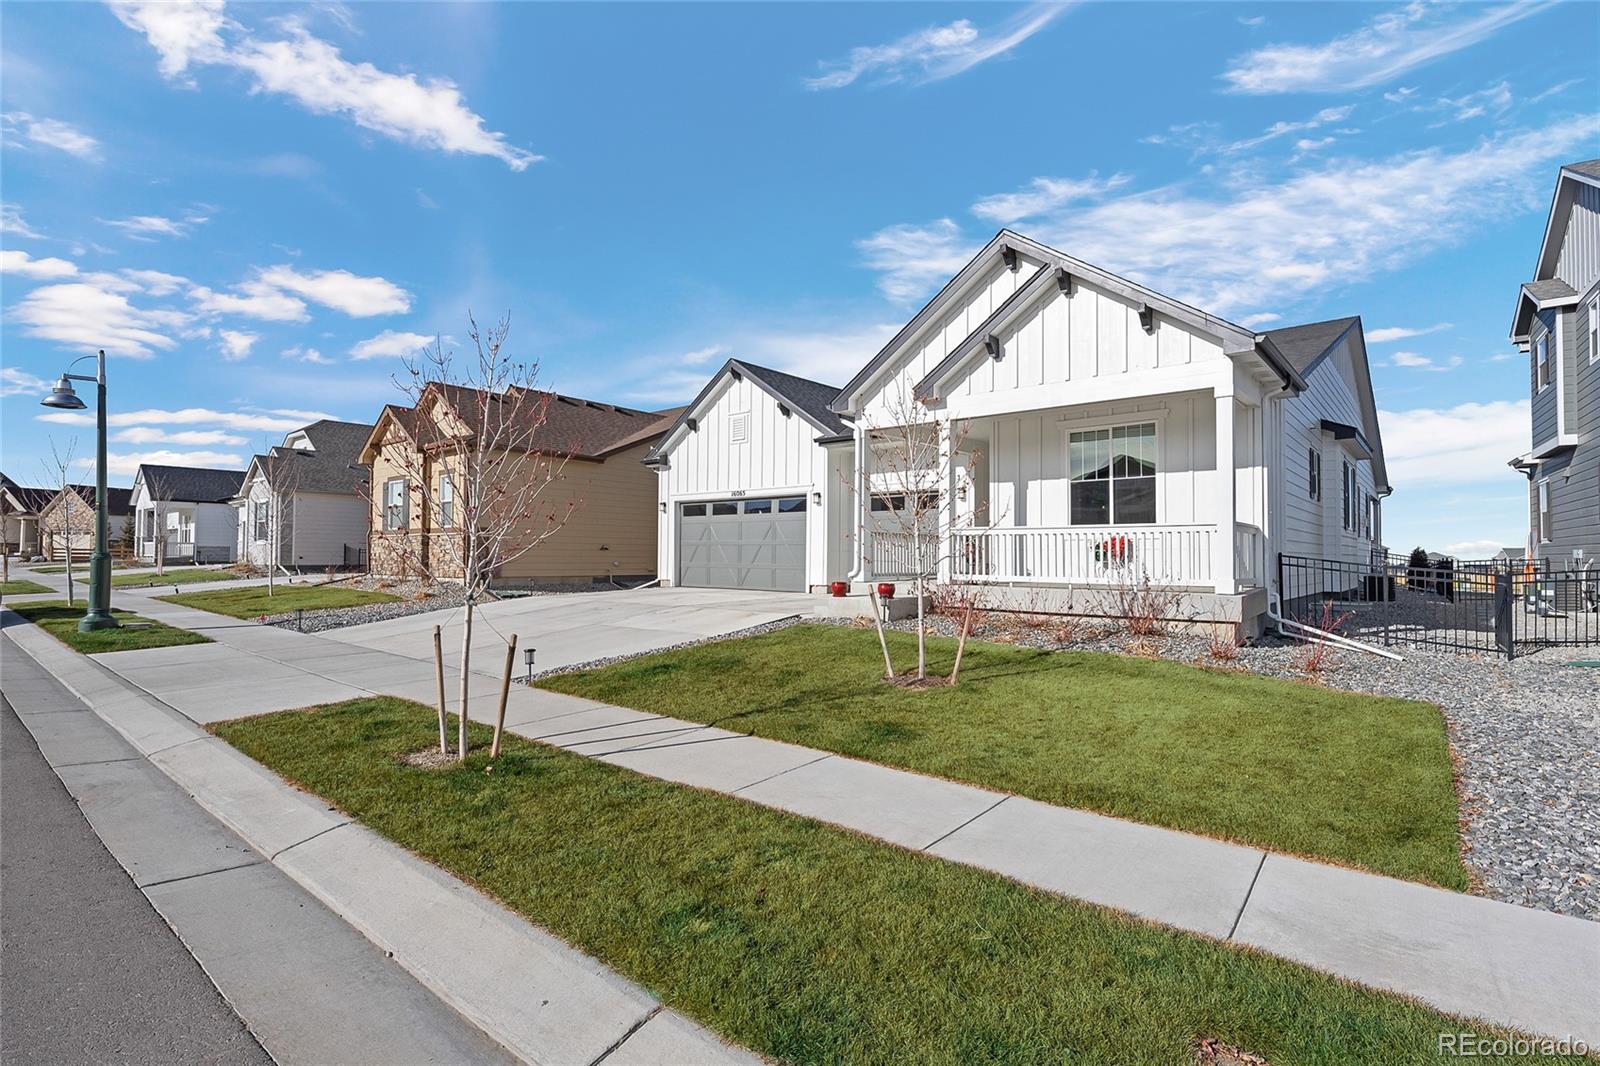 Report Image for 16065 E 109th Place,Commerce City, Colorado